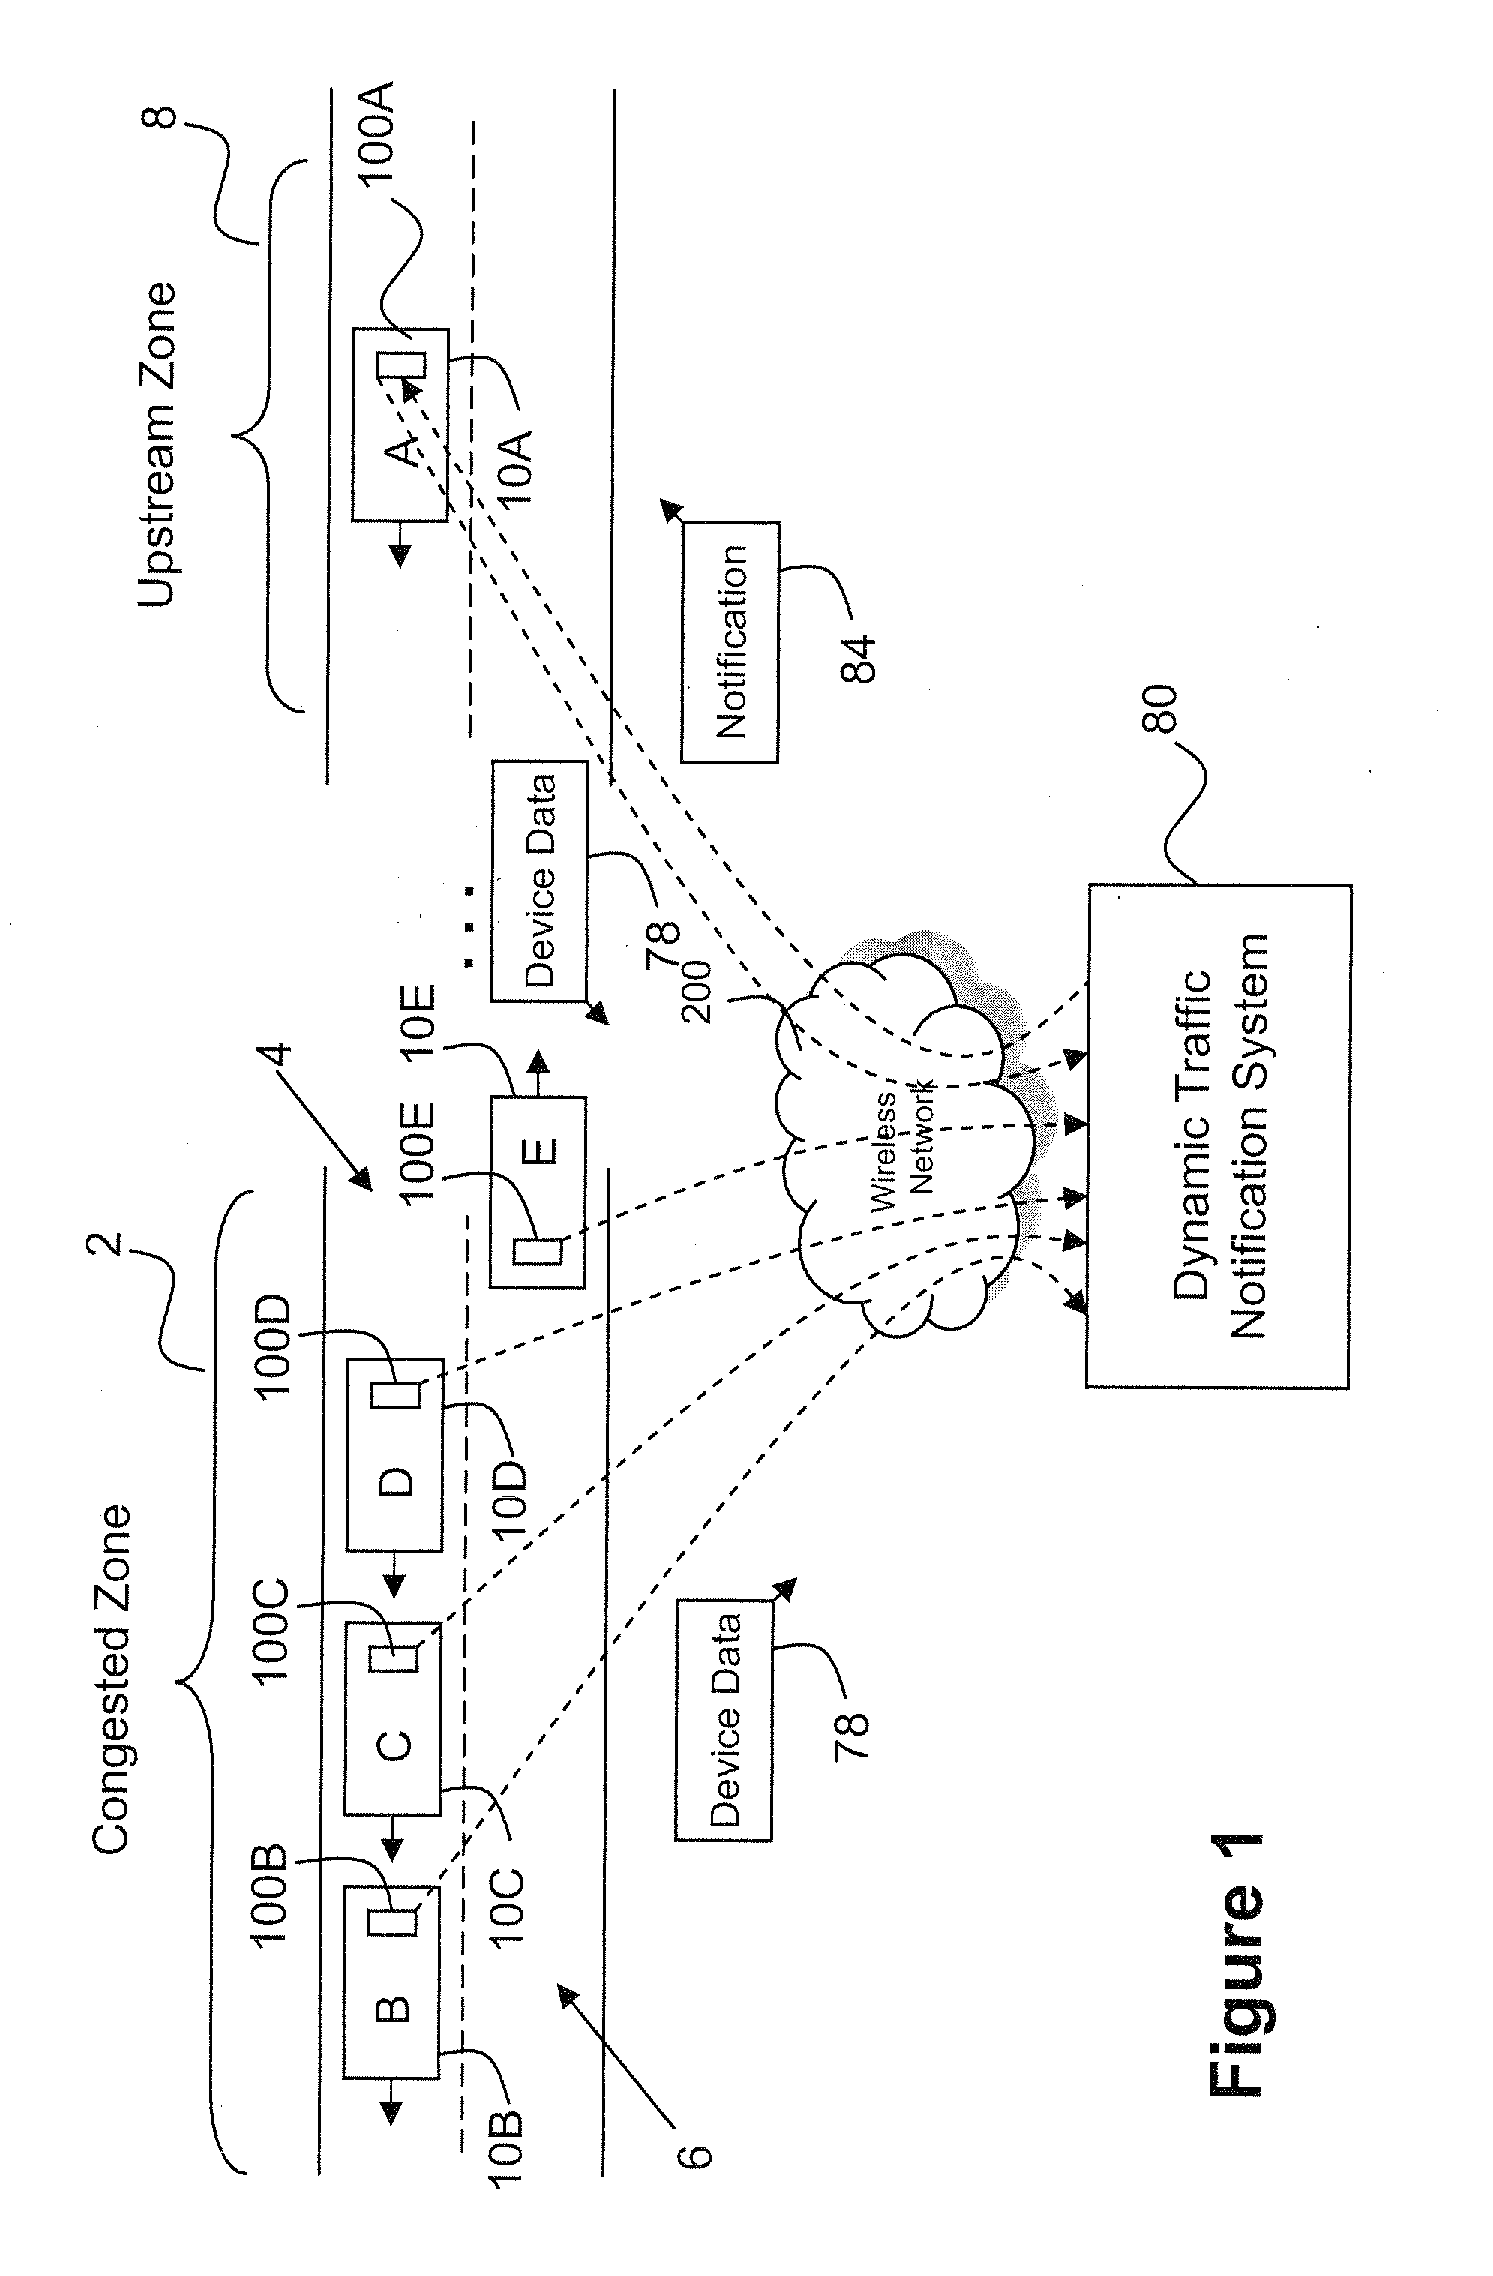 System and method of sending an arrival time estimate